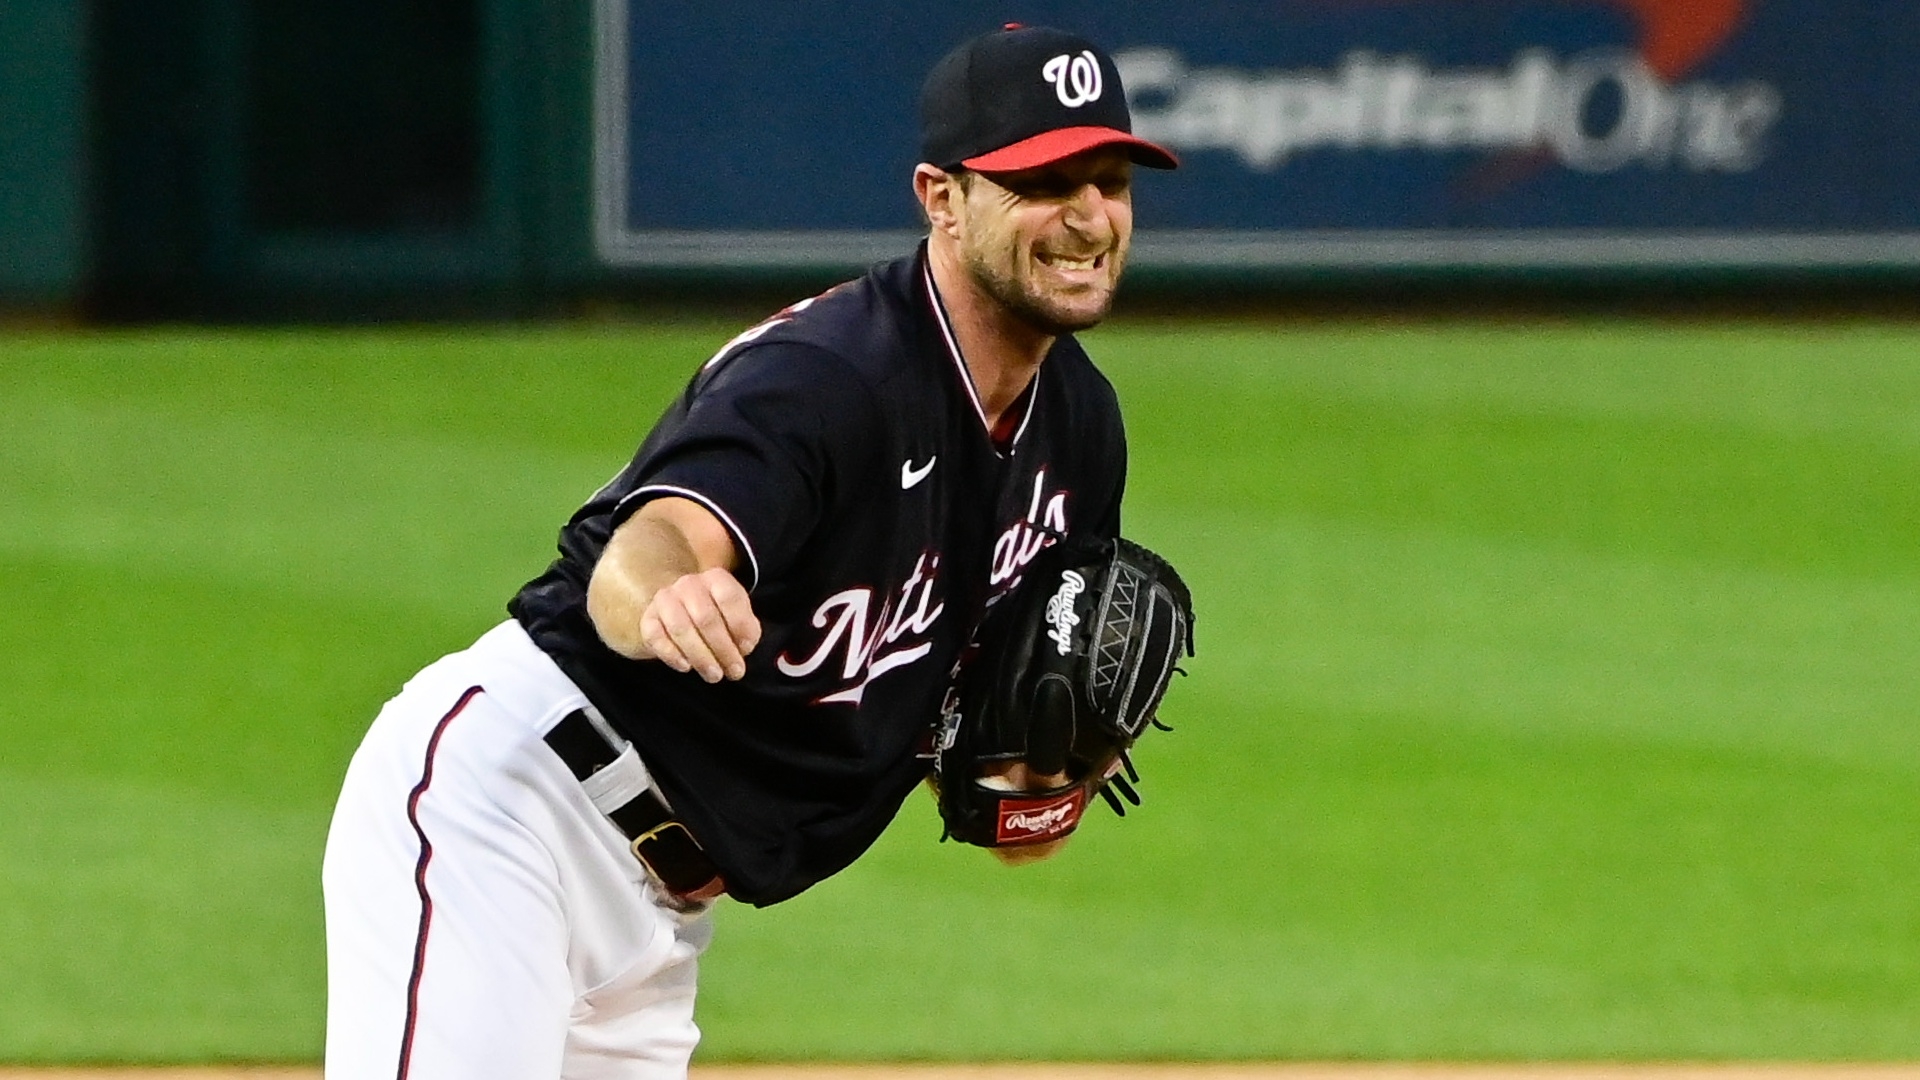 Abrams stays hot, homers on his bobblehead night as the Nationals